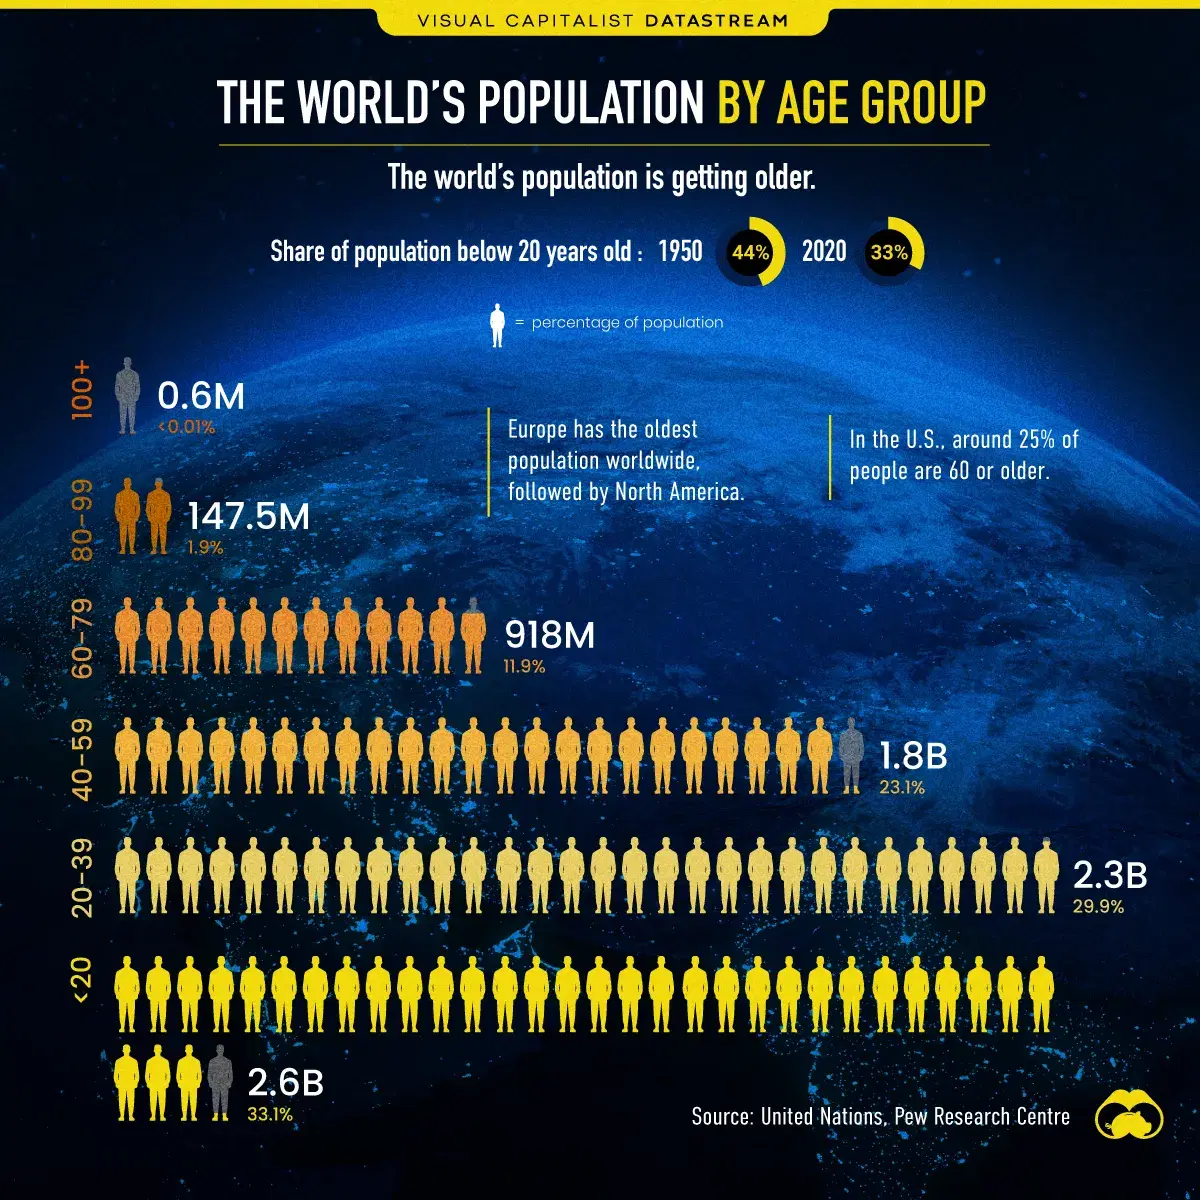 Visualizing the World’s Population by Age Group